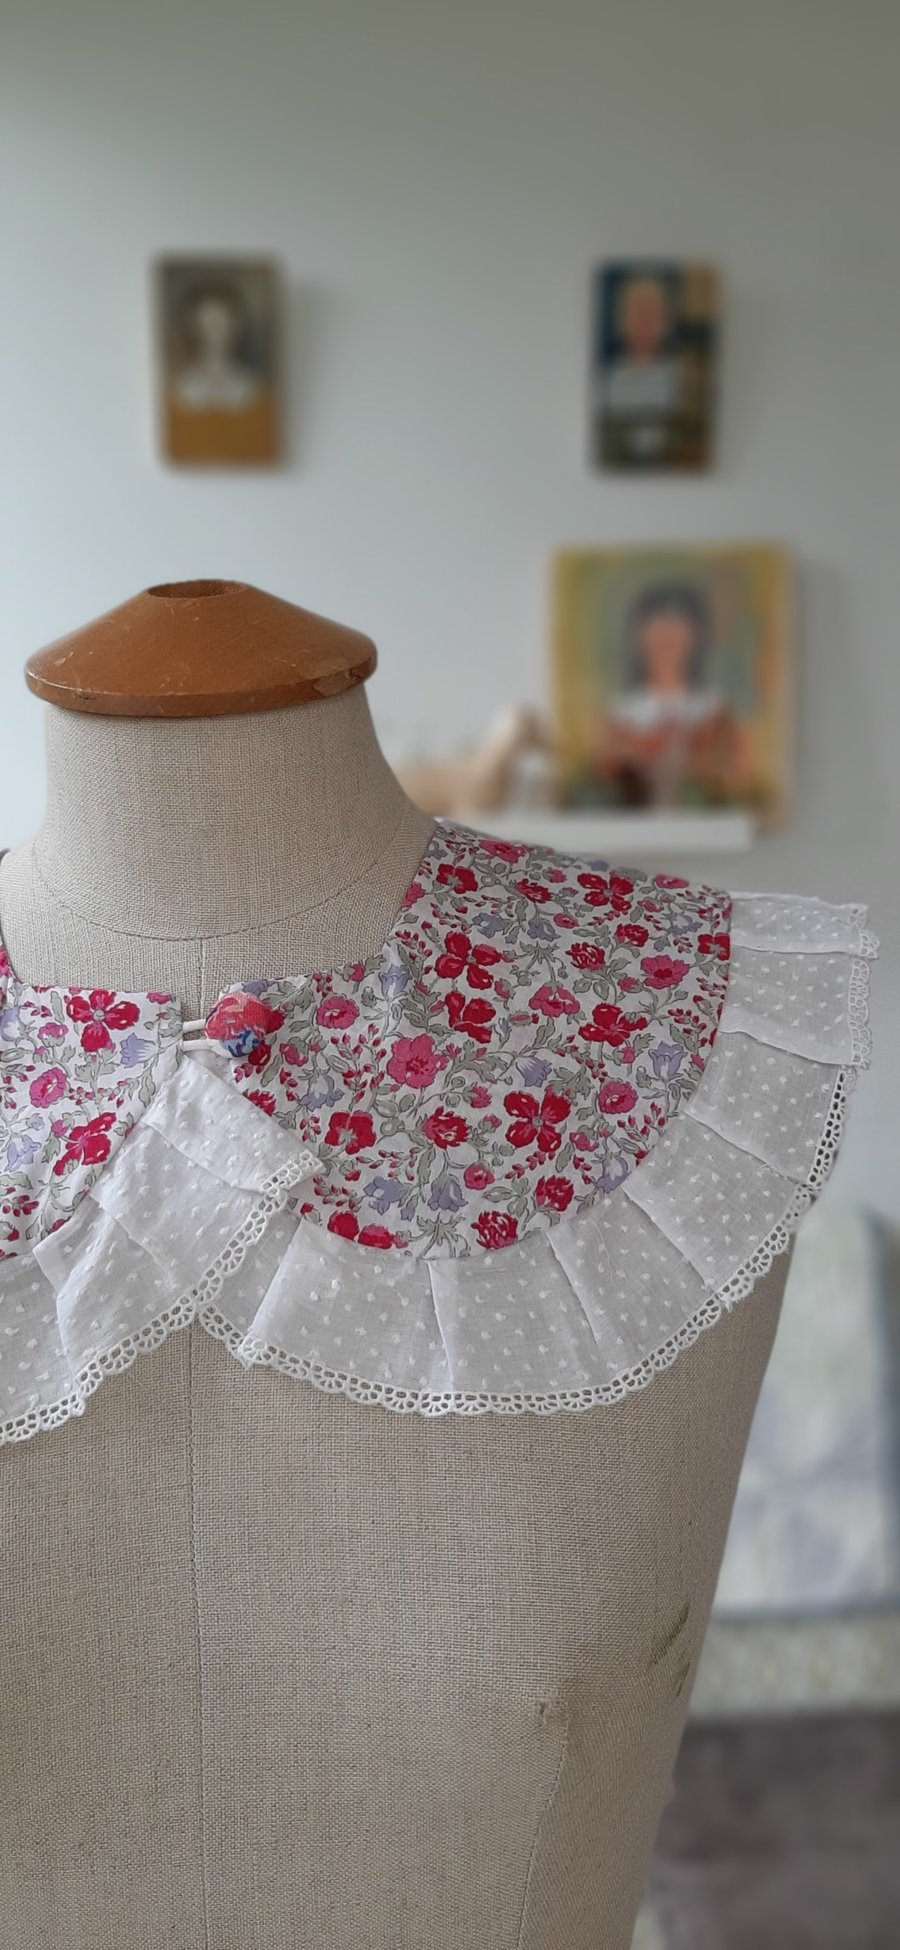 Oversized liberty print collar with vintage lace trim